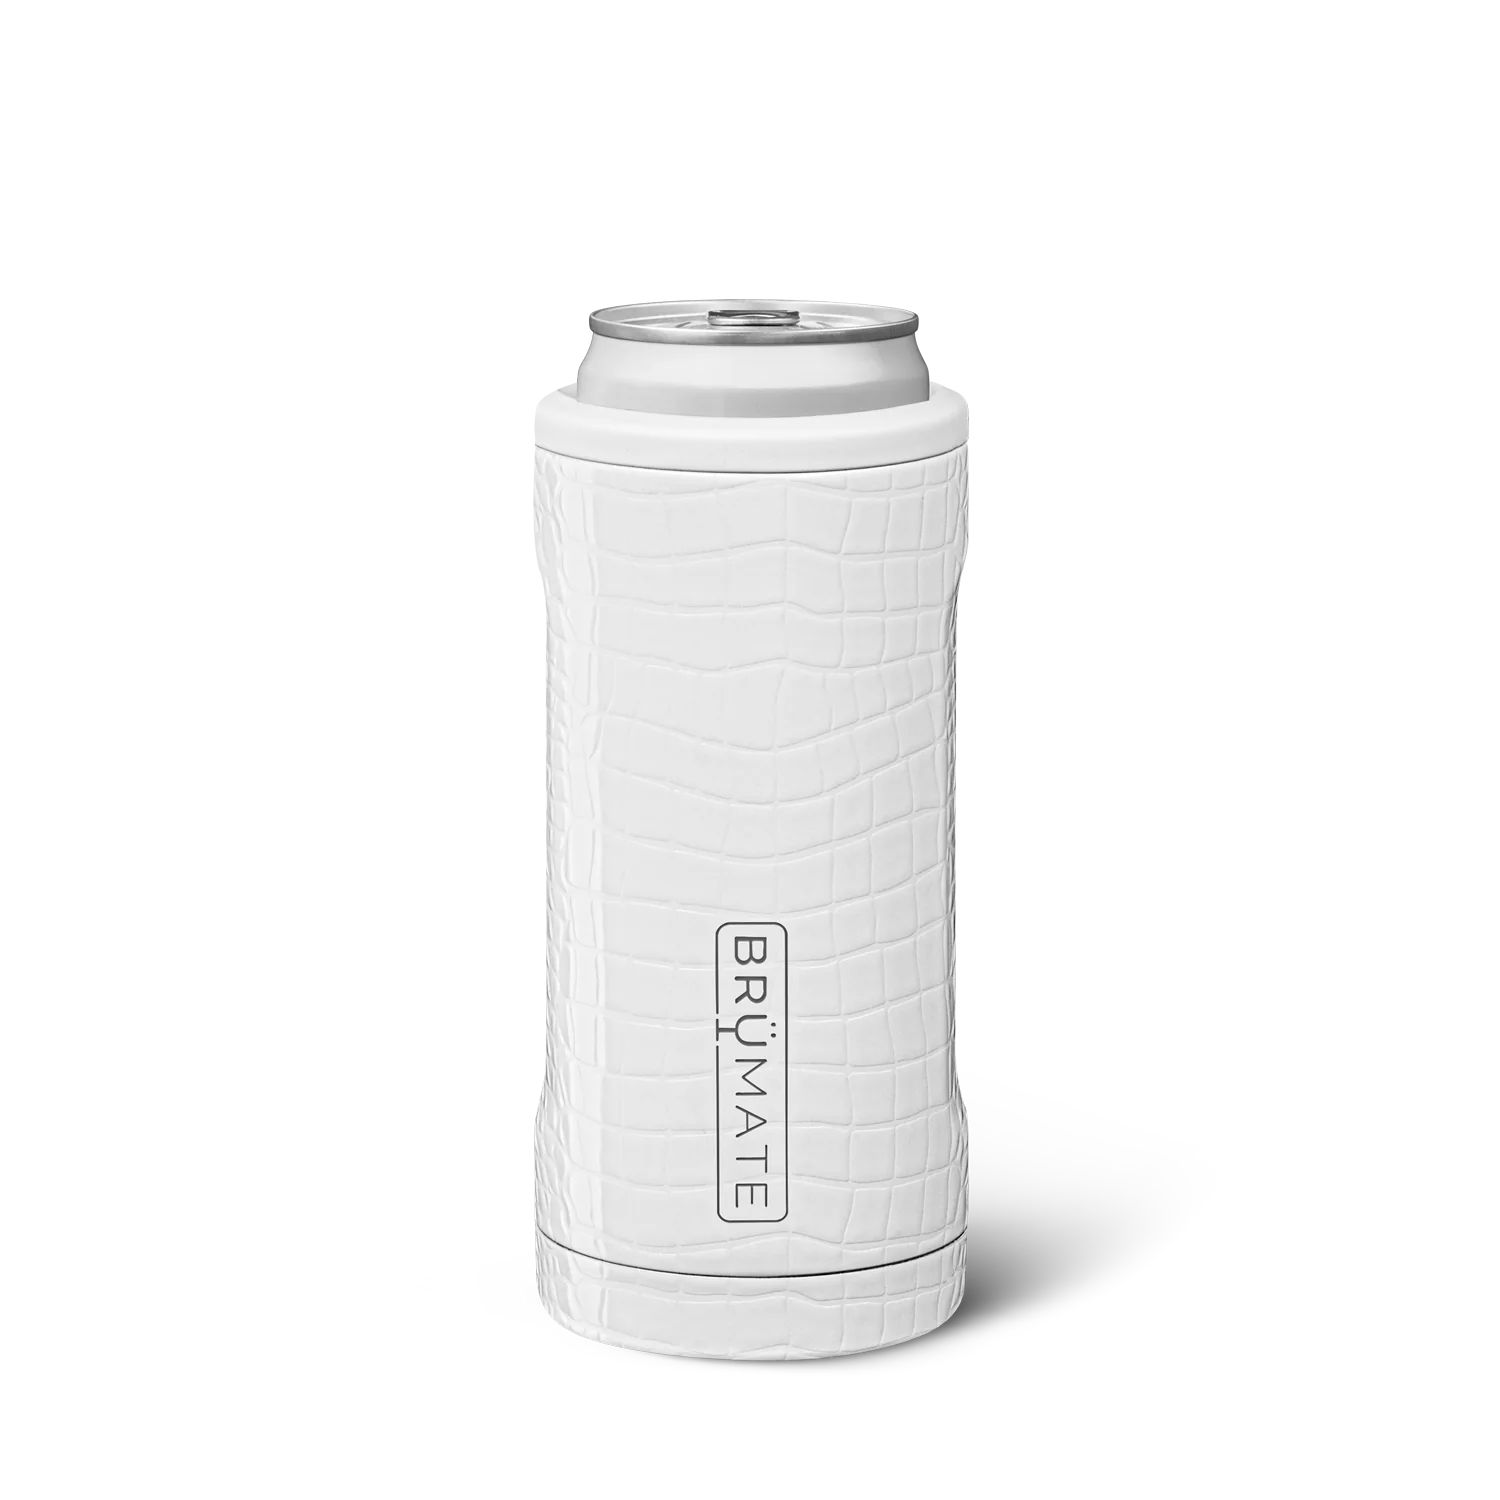 BrüMate - Insulated Tumblers, Coolers, and More | BruMate